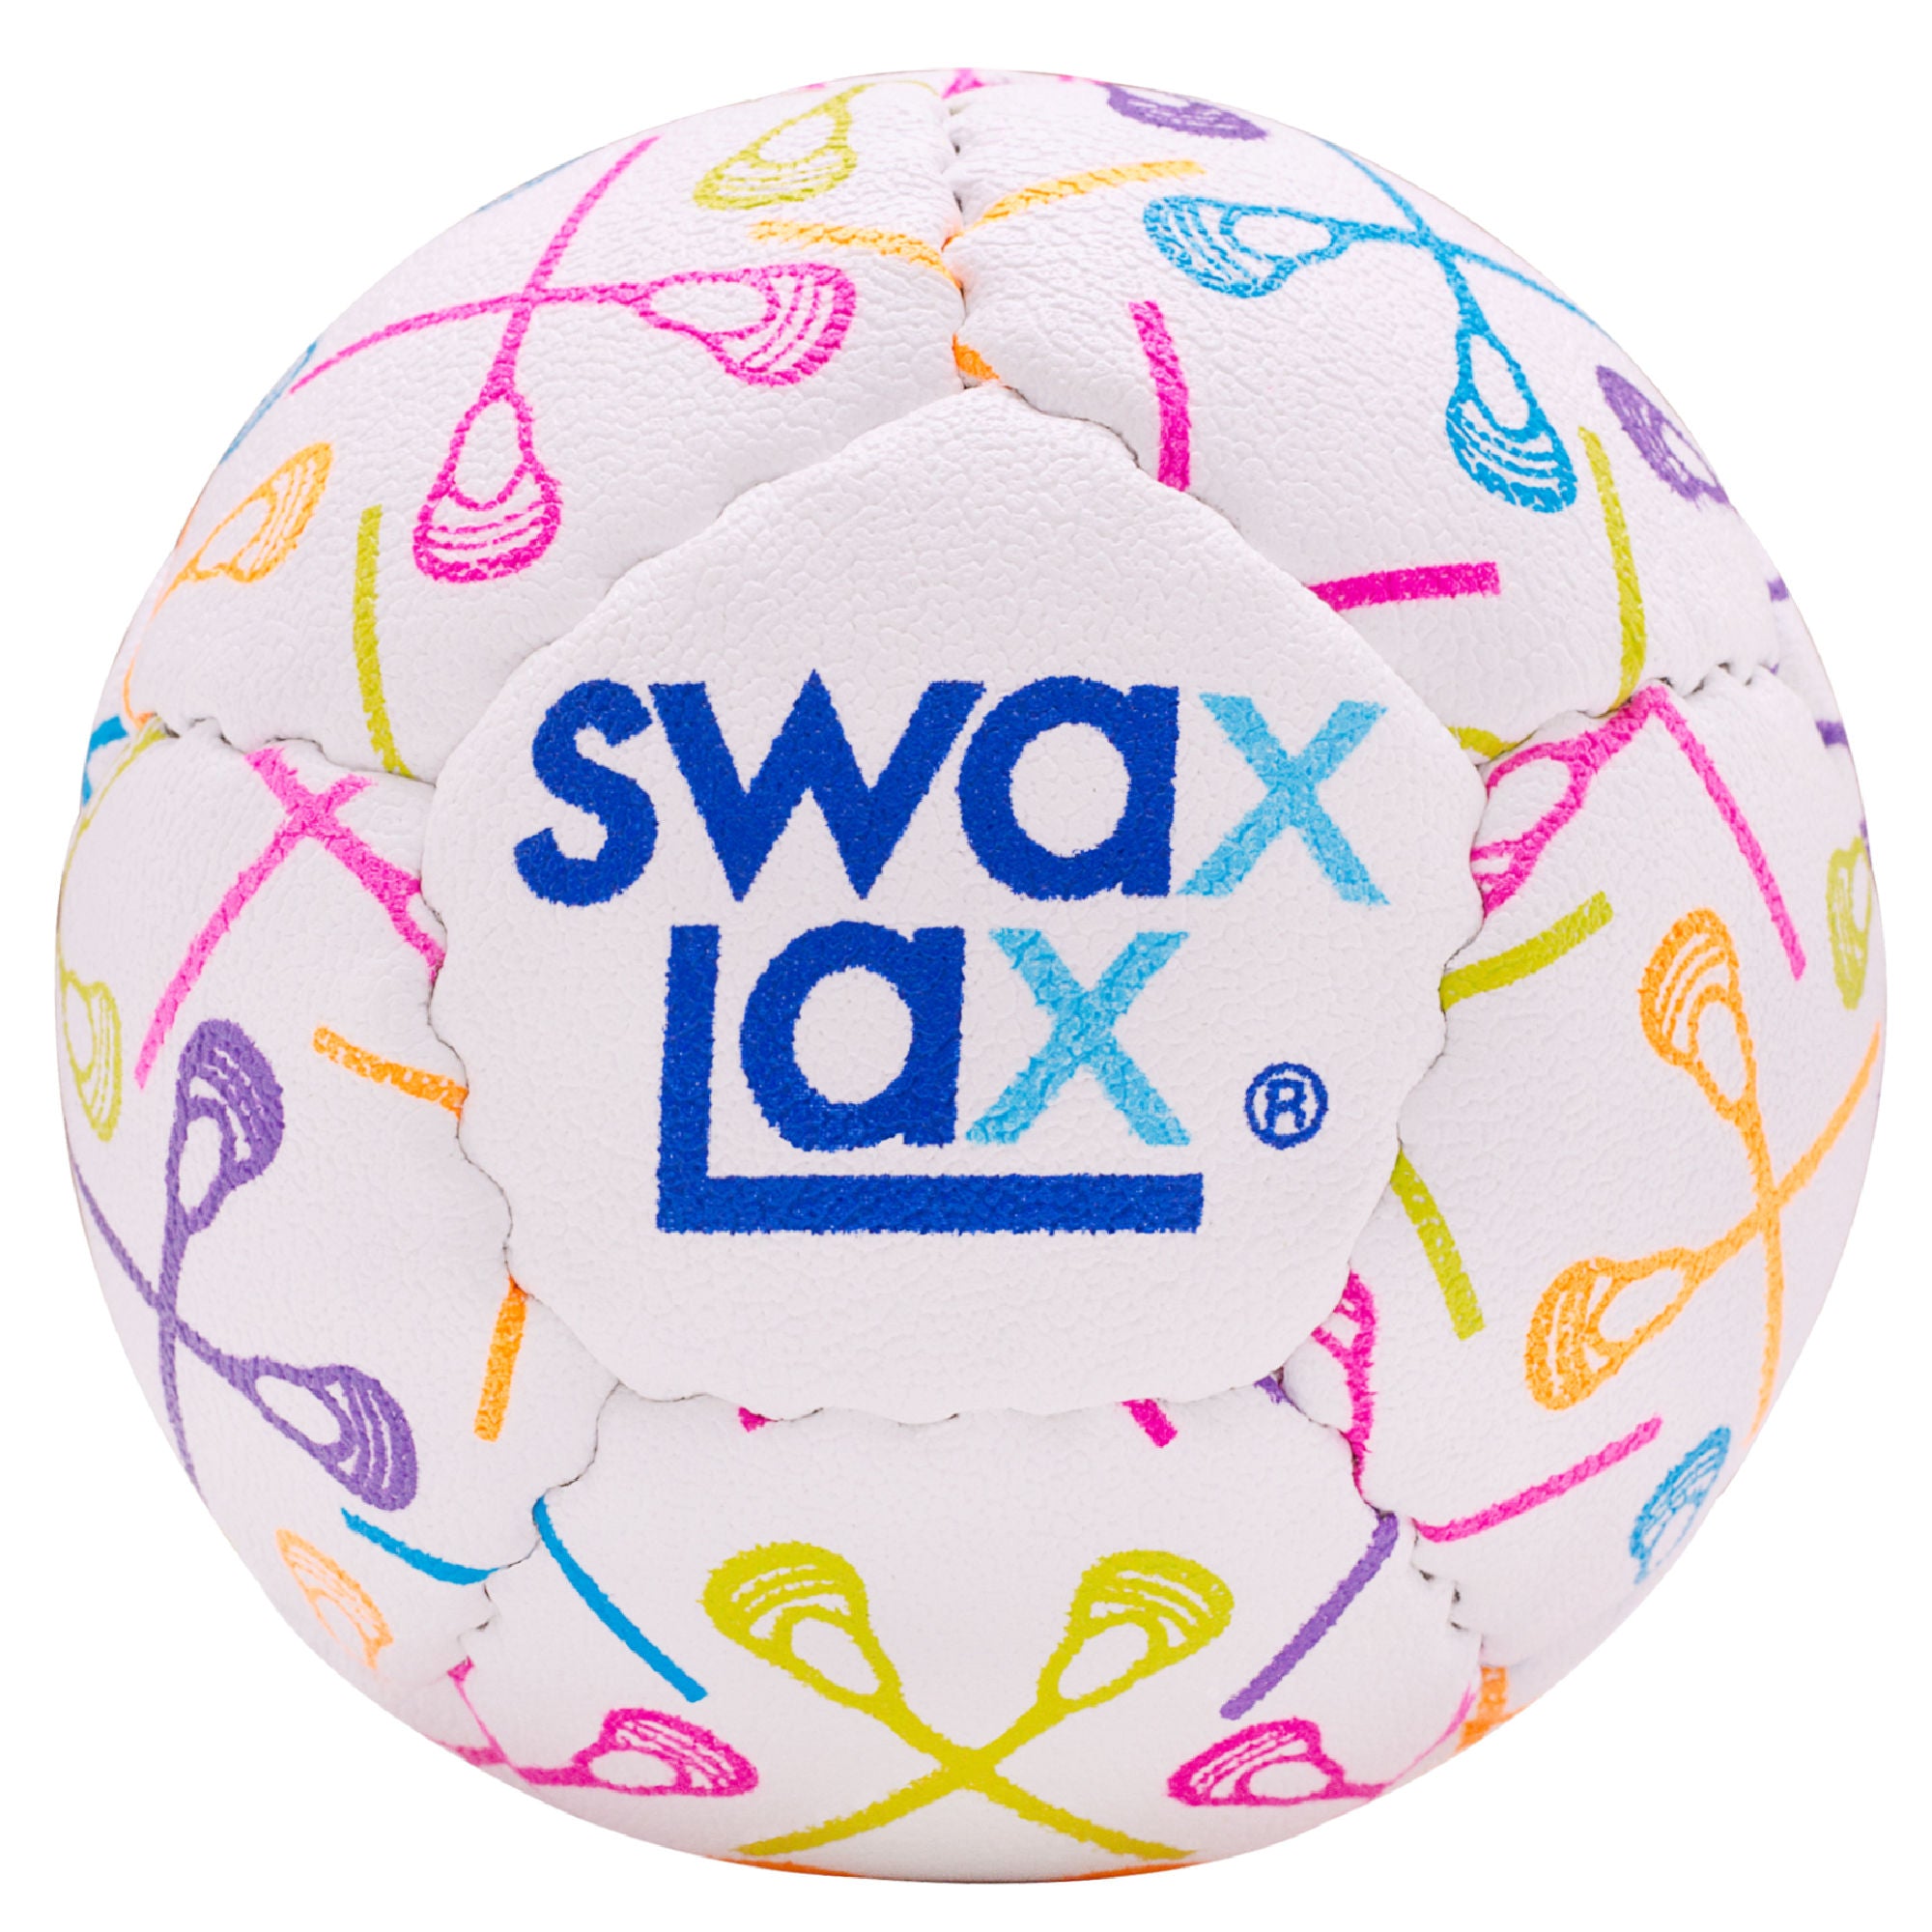 Swax Lax Lacrosse Training Ball - Neon Lax Sticks - Front